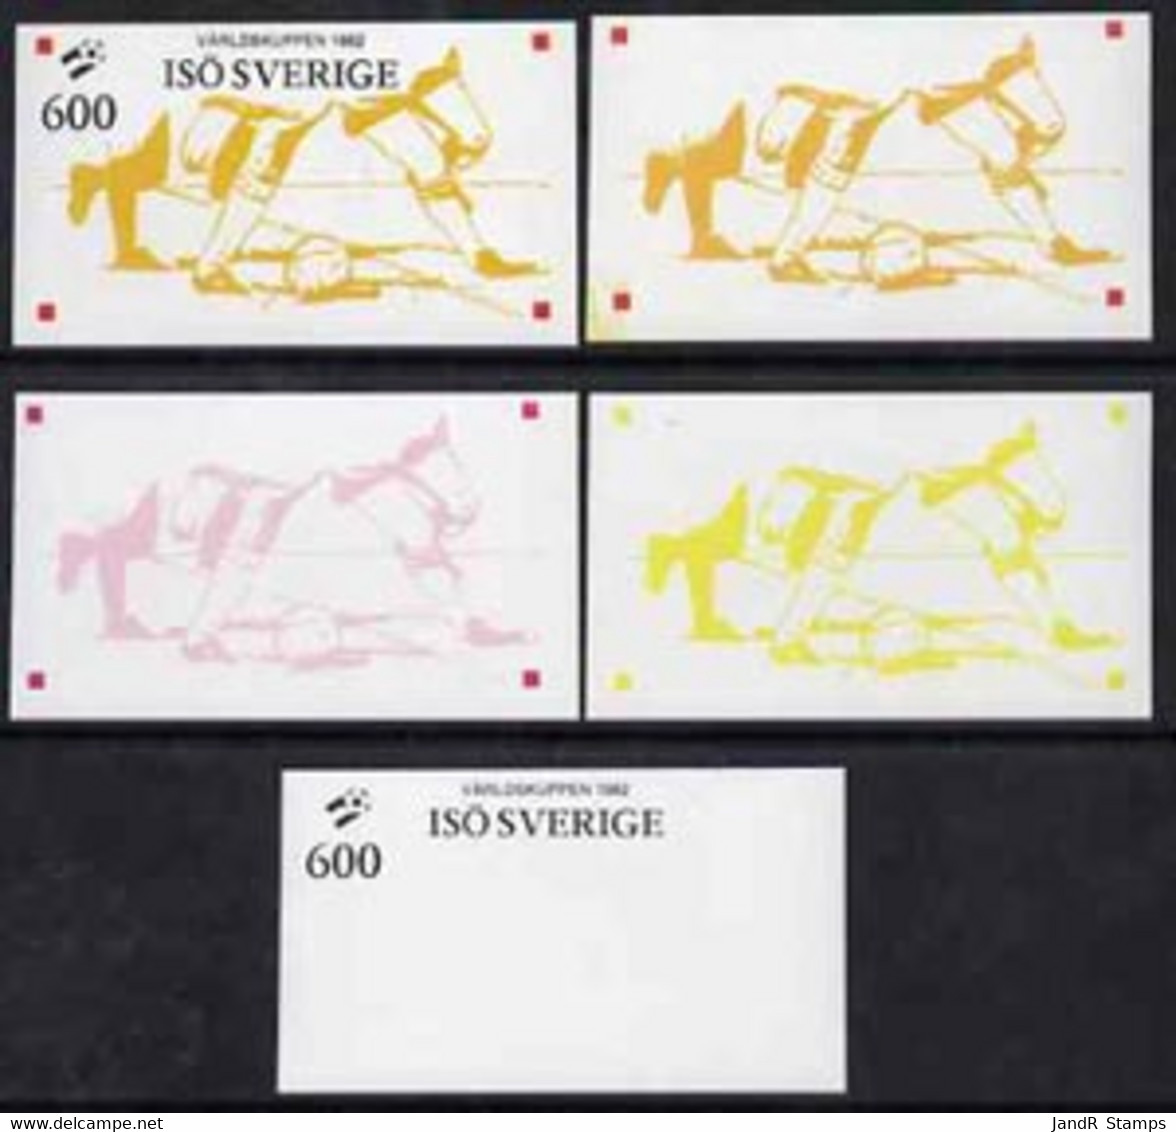 Iso - Sweden 1982 Football World Cup Imperf Souvenir Sheet (600 Value) Set Of 5 Progressive Colour Proofs Comprising The - Local Post Stamps